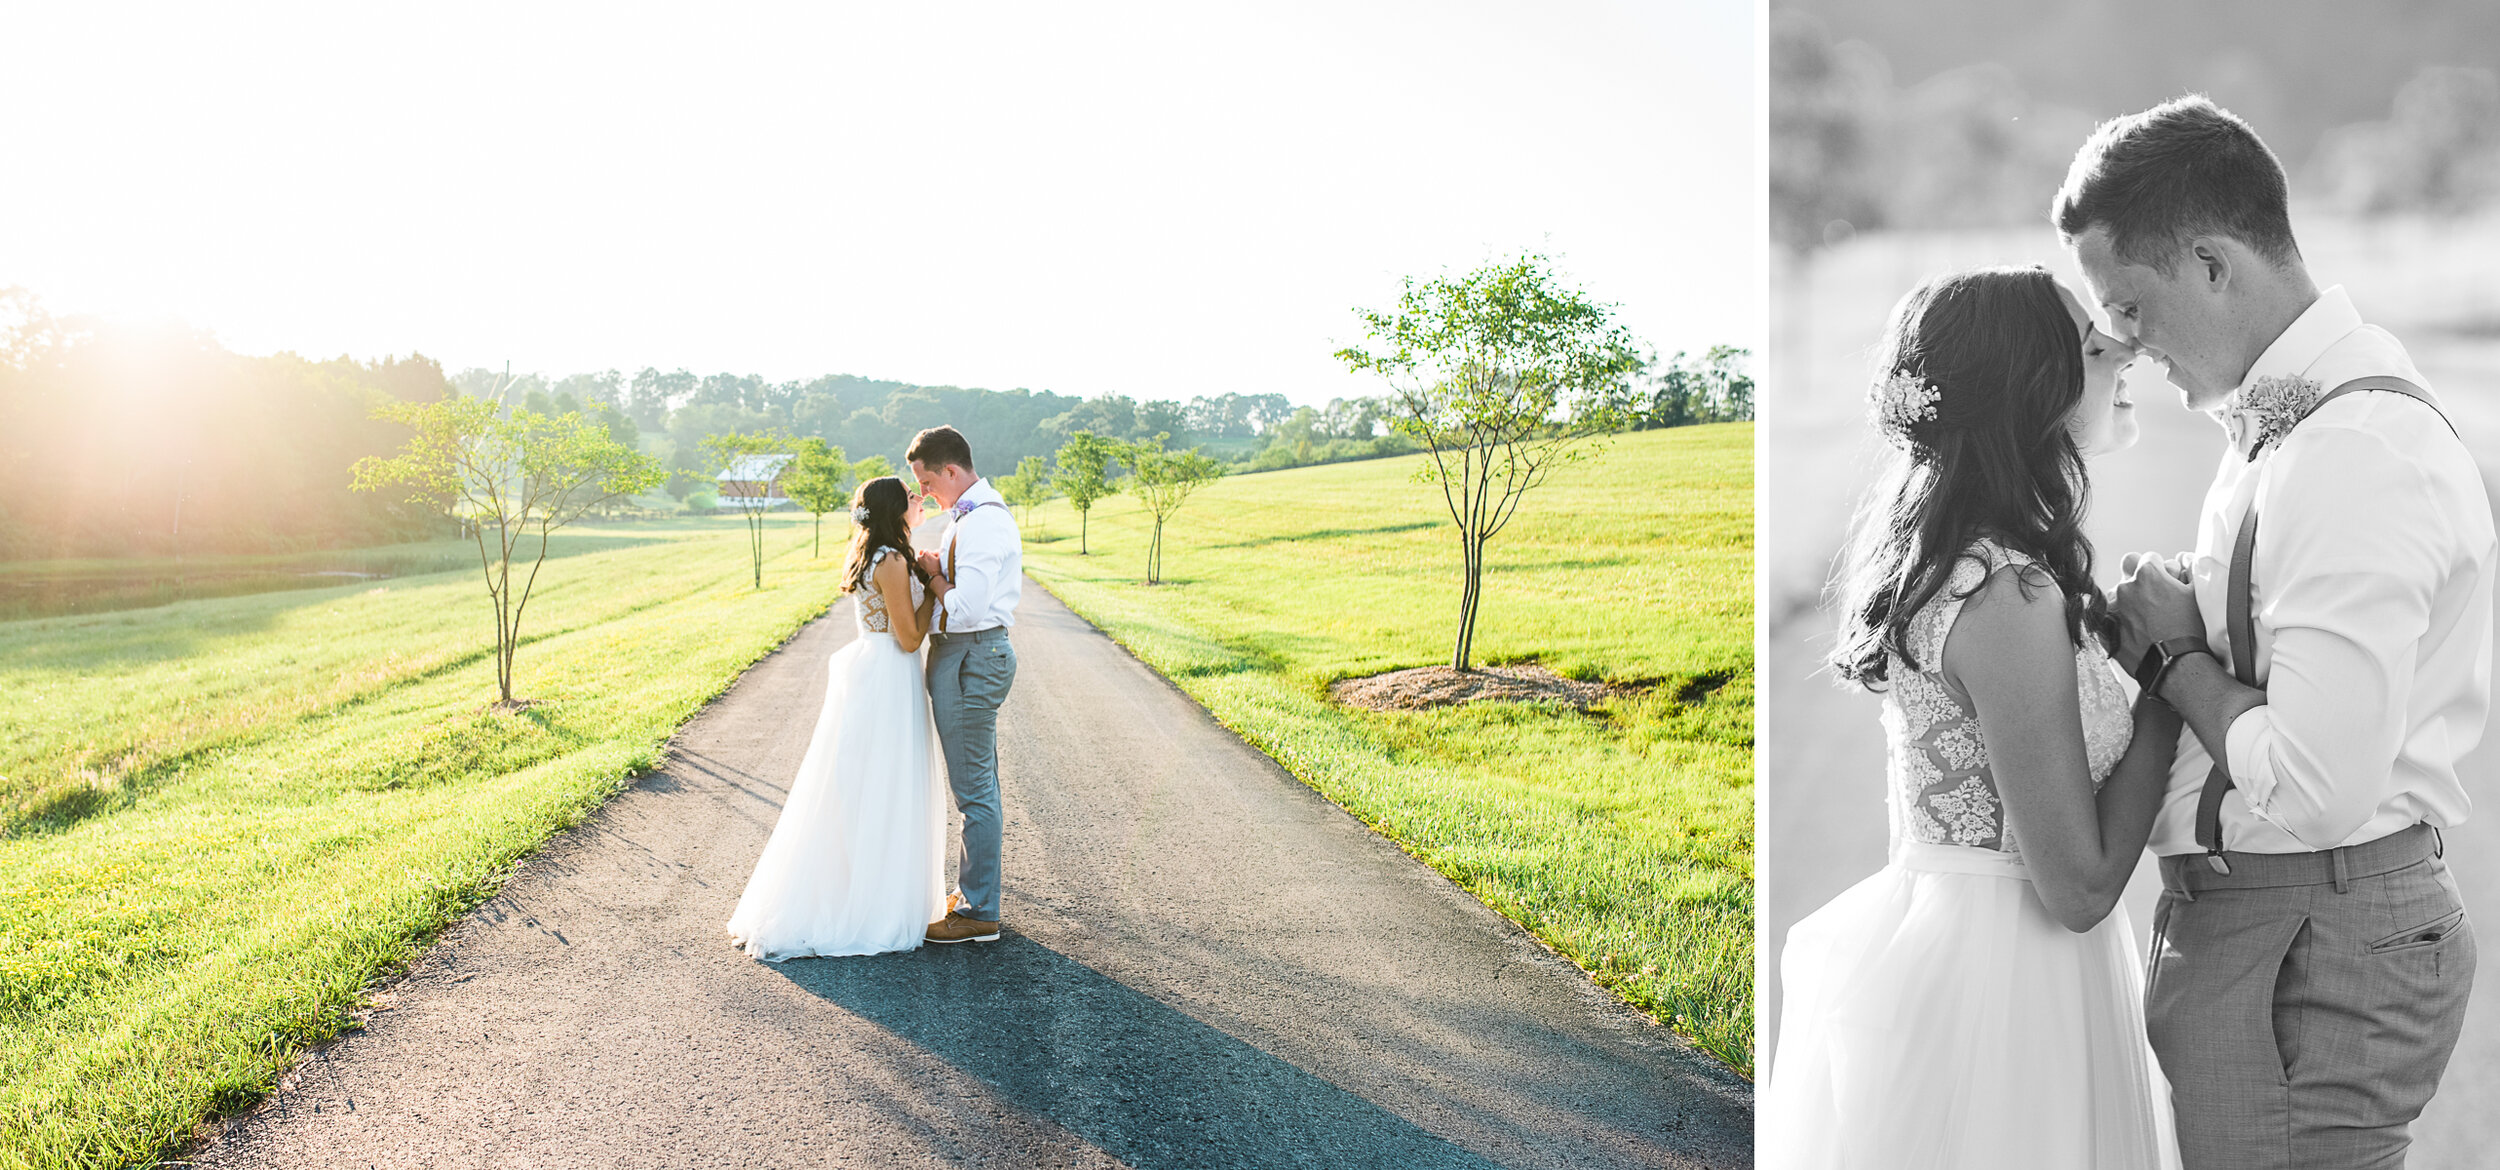 Golden Hour Sunset Bridal Photography, Bride and Groom, Mariah Fisher Photography.jpg